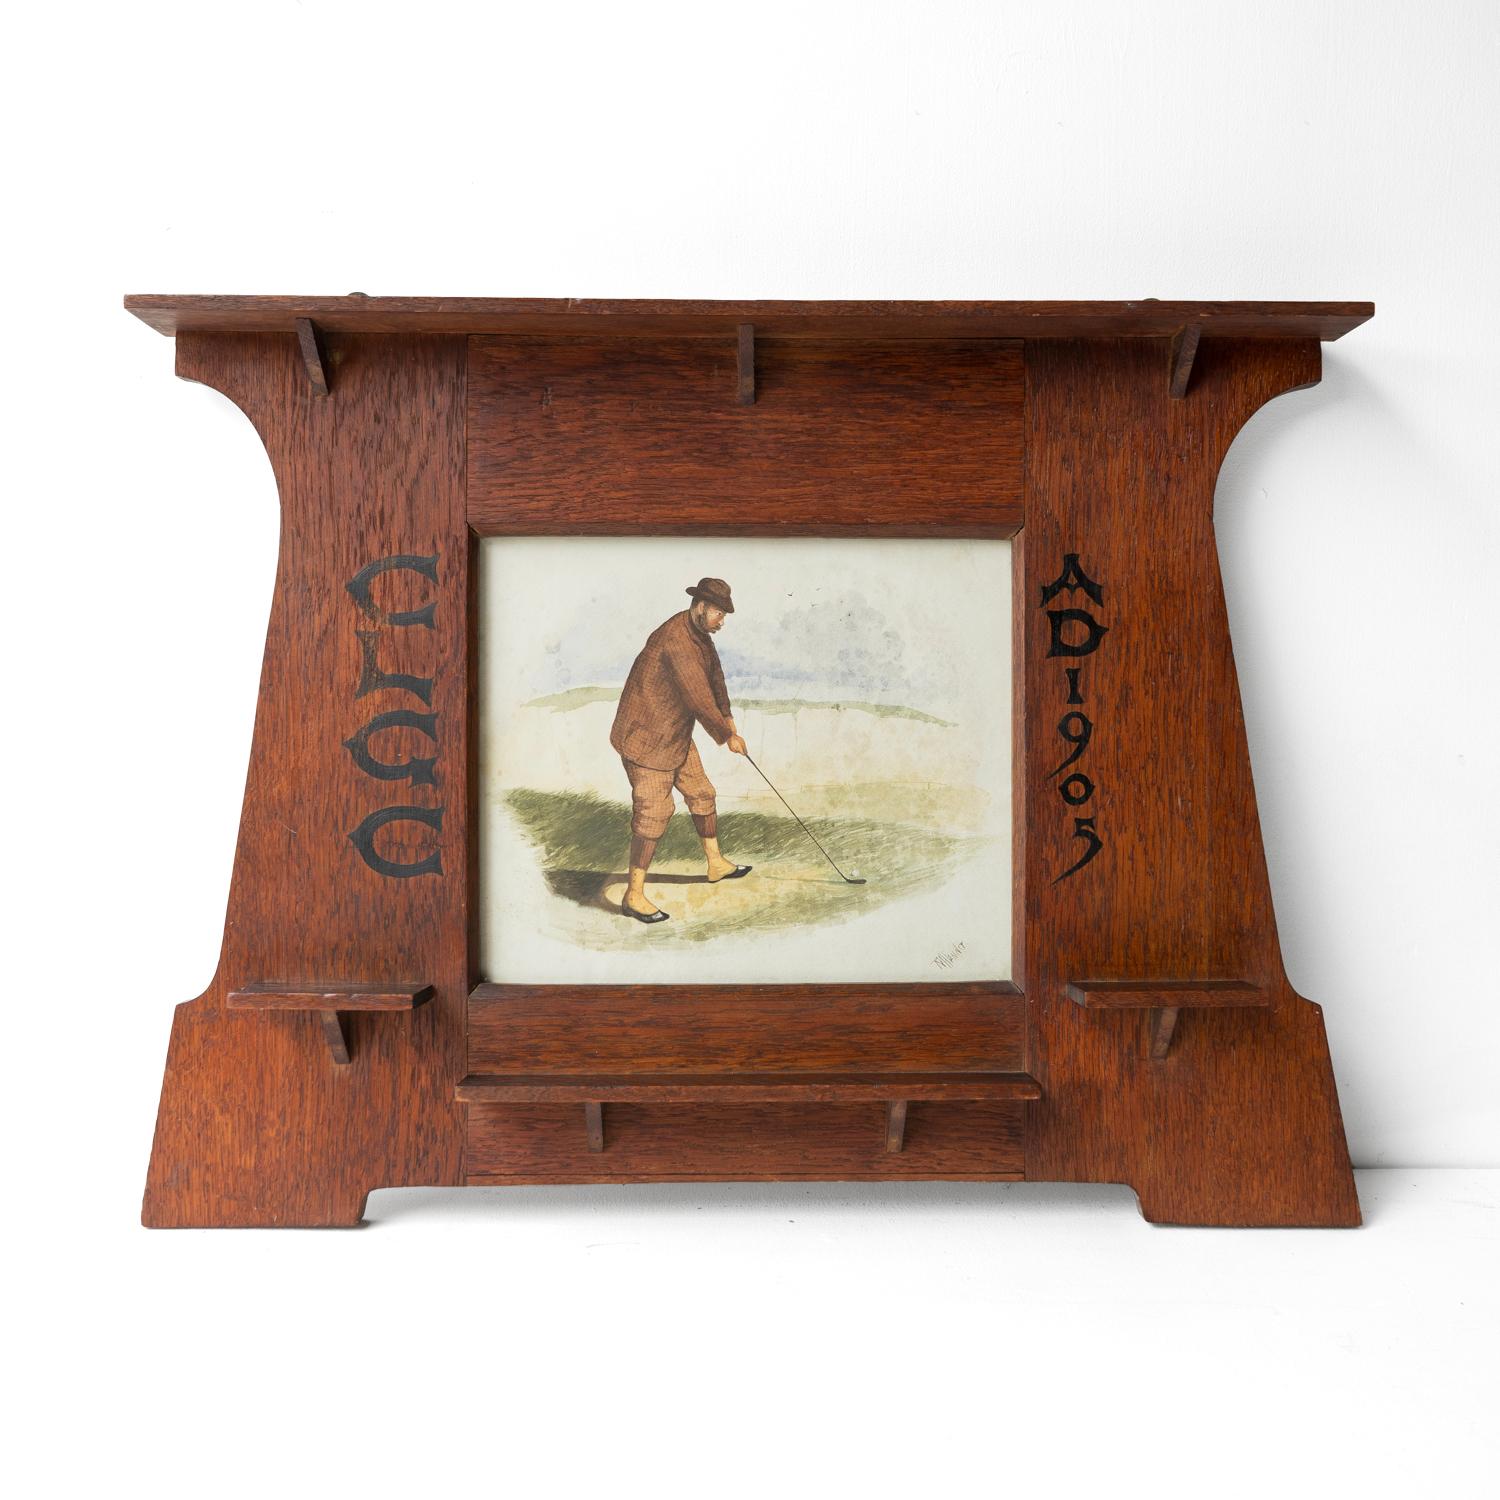 ANTIQUE GOLFING INTEREST PICTURE AND FRAME
An interesting and unique piece which was probably commissioned for an early golf club.

A charming watercolour study of an early 20th-century golfer in typical tweed attire in a picturesque setting with